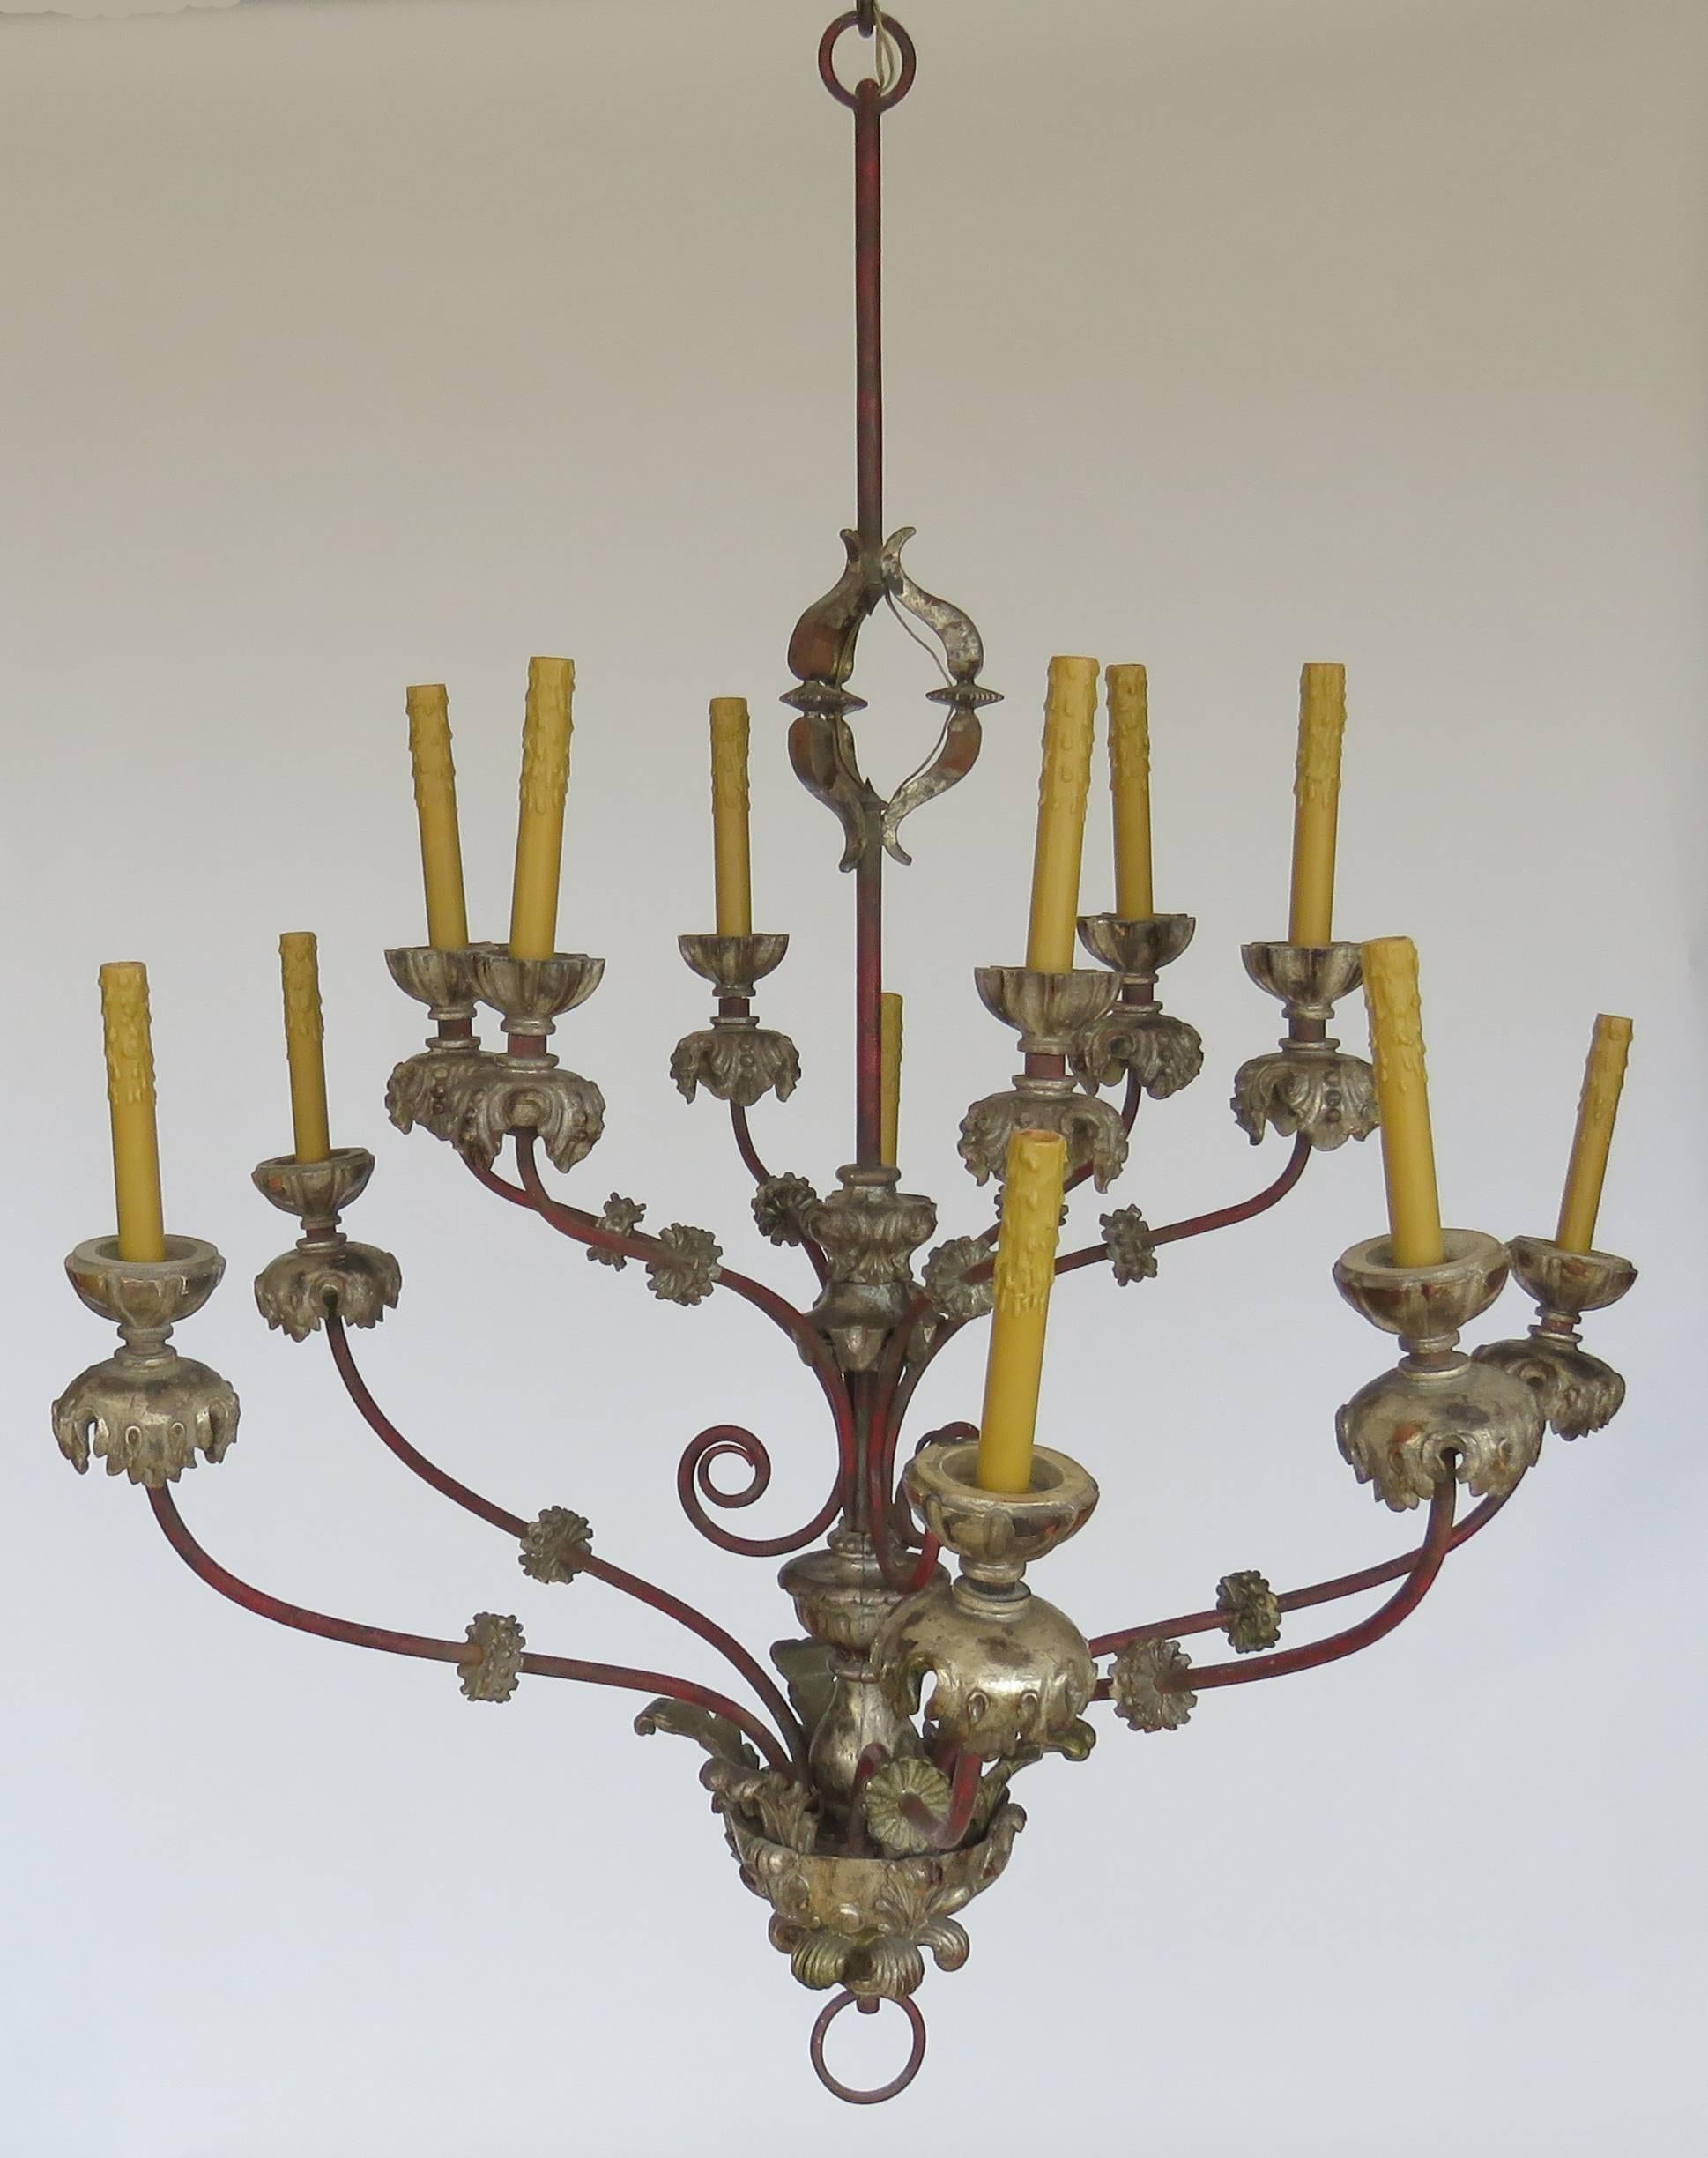 Unusual hollow iron chandelier with decorative wooden bobèches, having a distressed painted finish, with two tiers of six scroll candle arms. Original paint.

The chandelier is shipped disassembled.